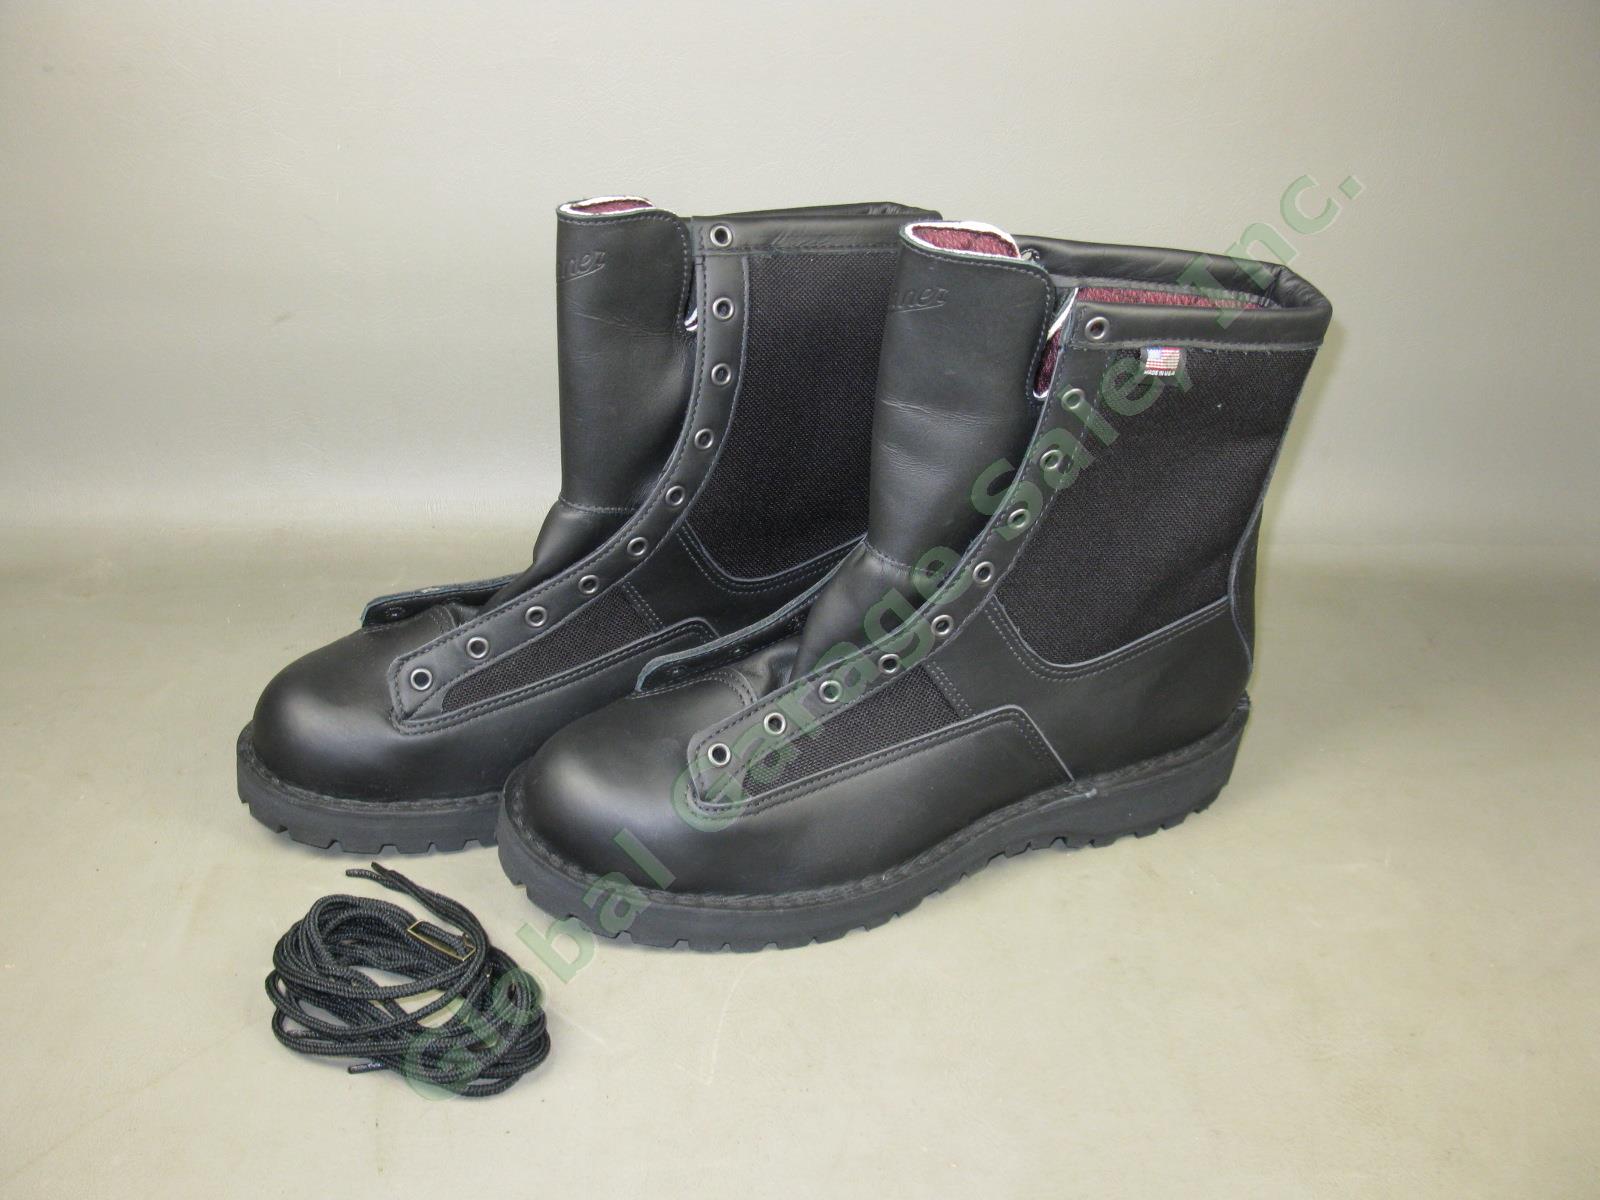 NEW Danner Acadia 69210 8" Black 200G Insulated Duty Work Boots USA Made Mens 13